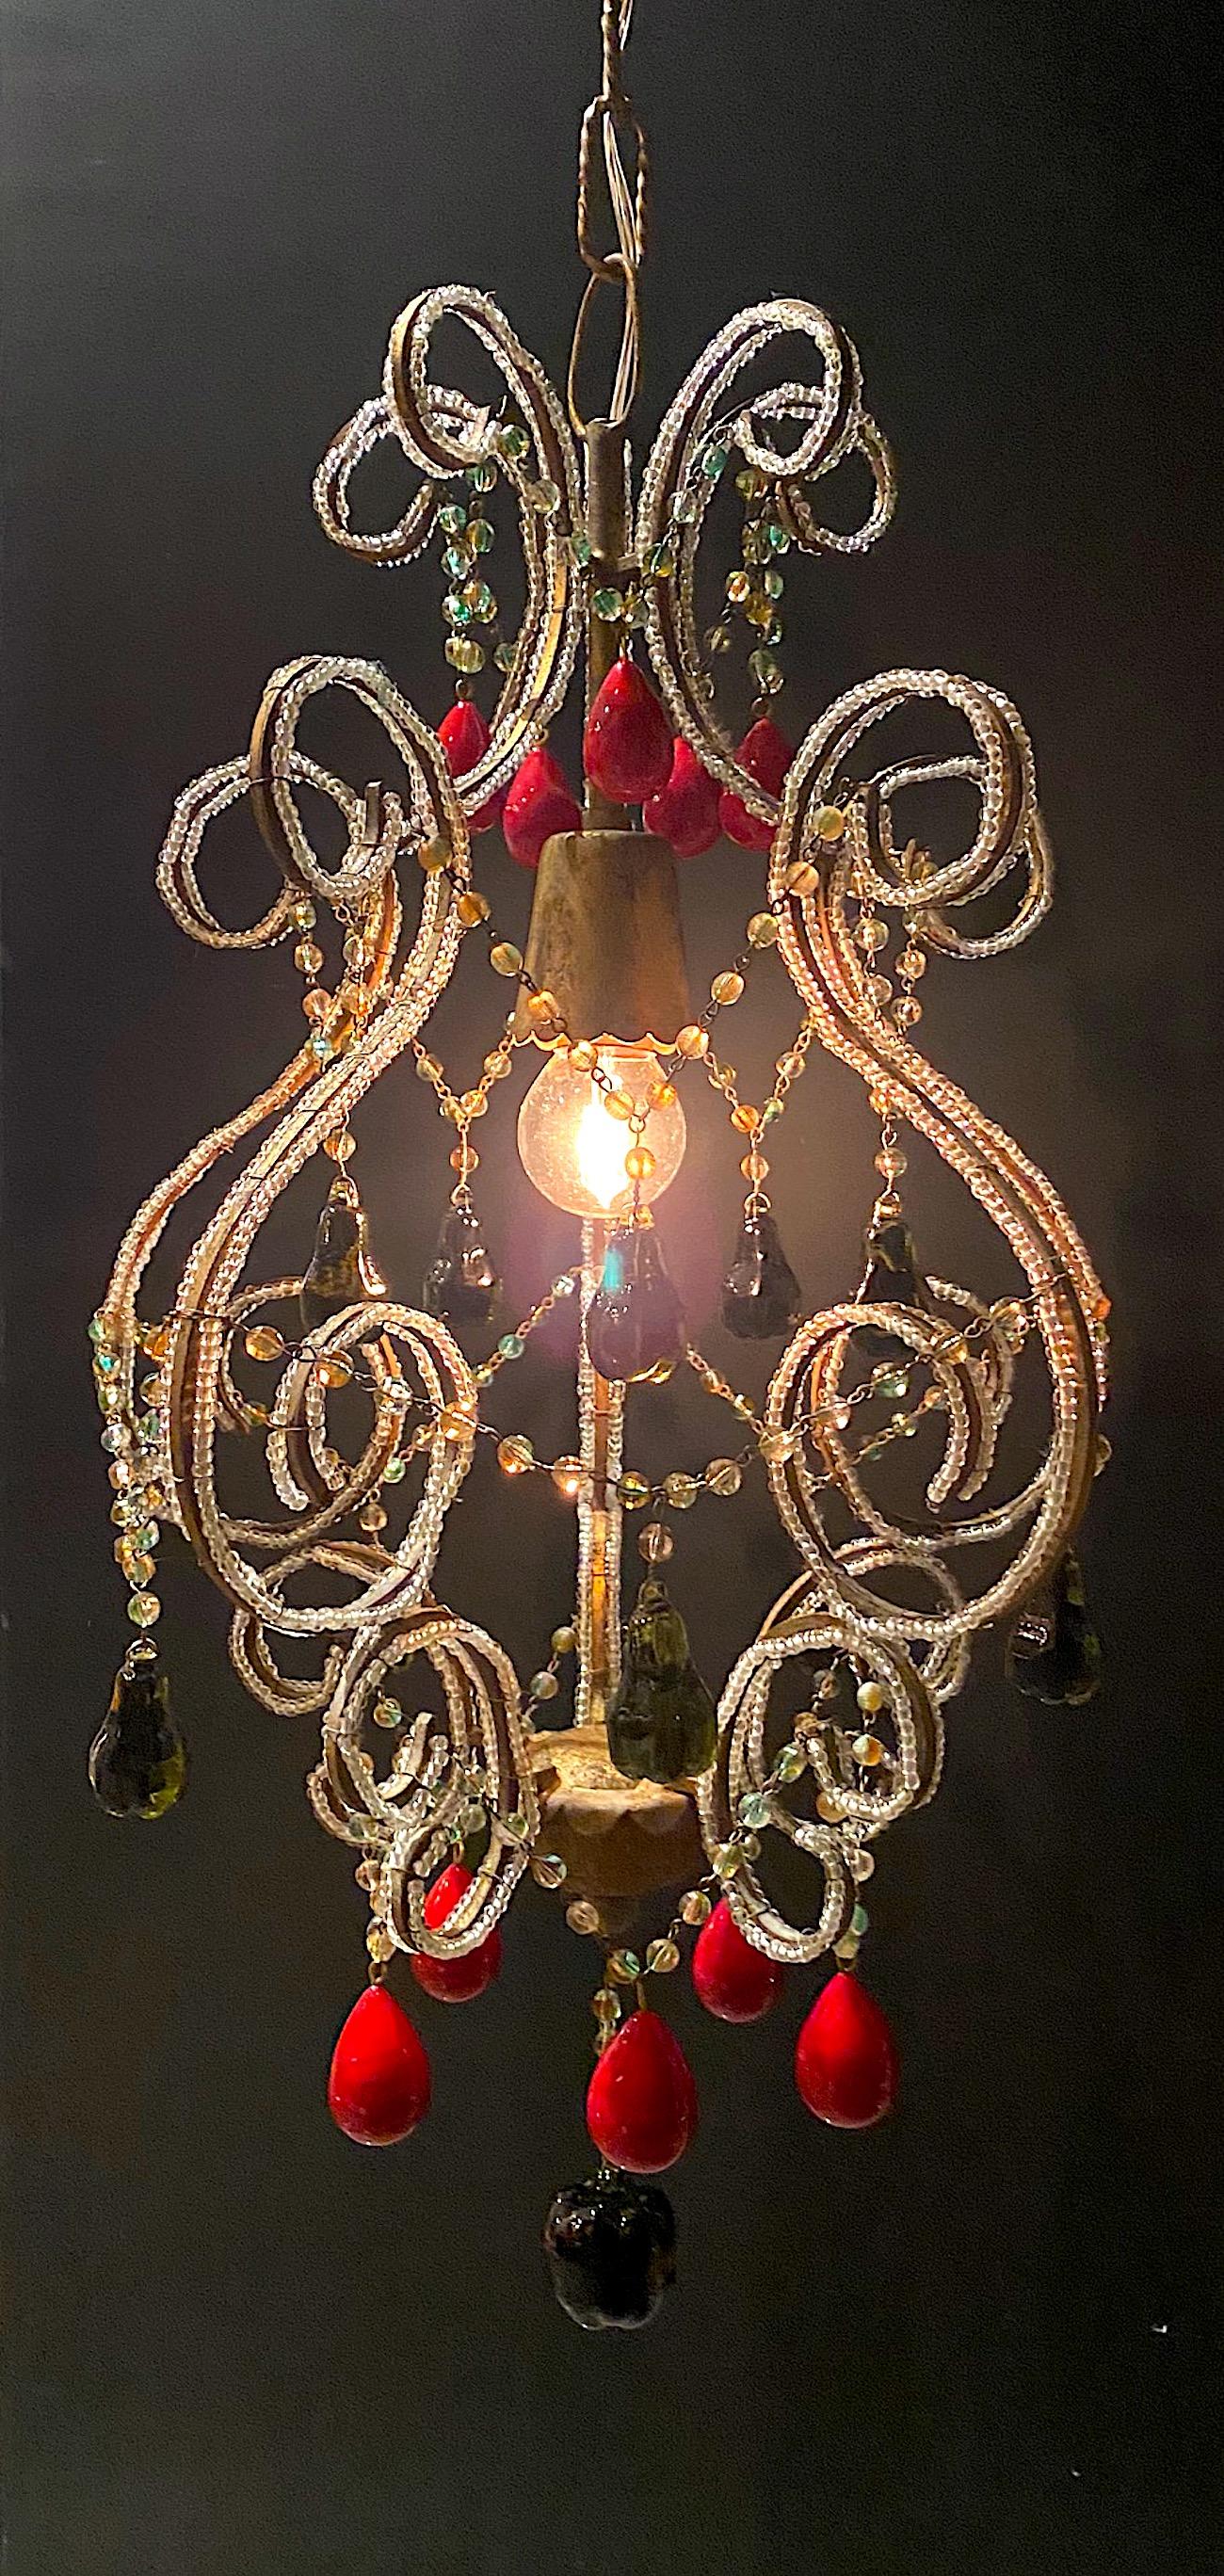 Italian Hollywood Regency pendant light with Venetian fruits and beads, circa 1950. The iron frame has a painted gold finish and is wrapped with handmade and polished clear glass beads. The five supports of the light have four rows of clear with